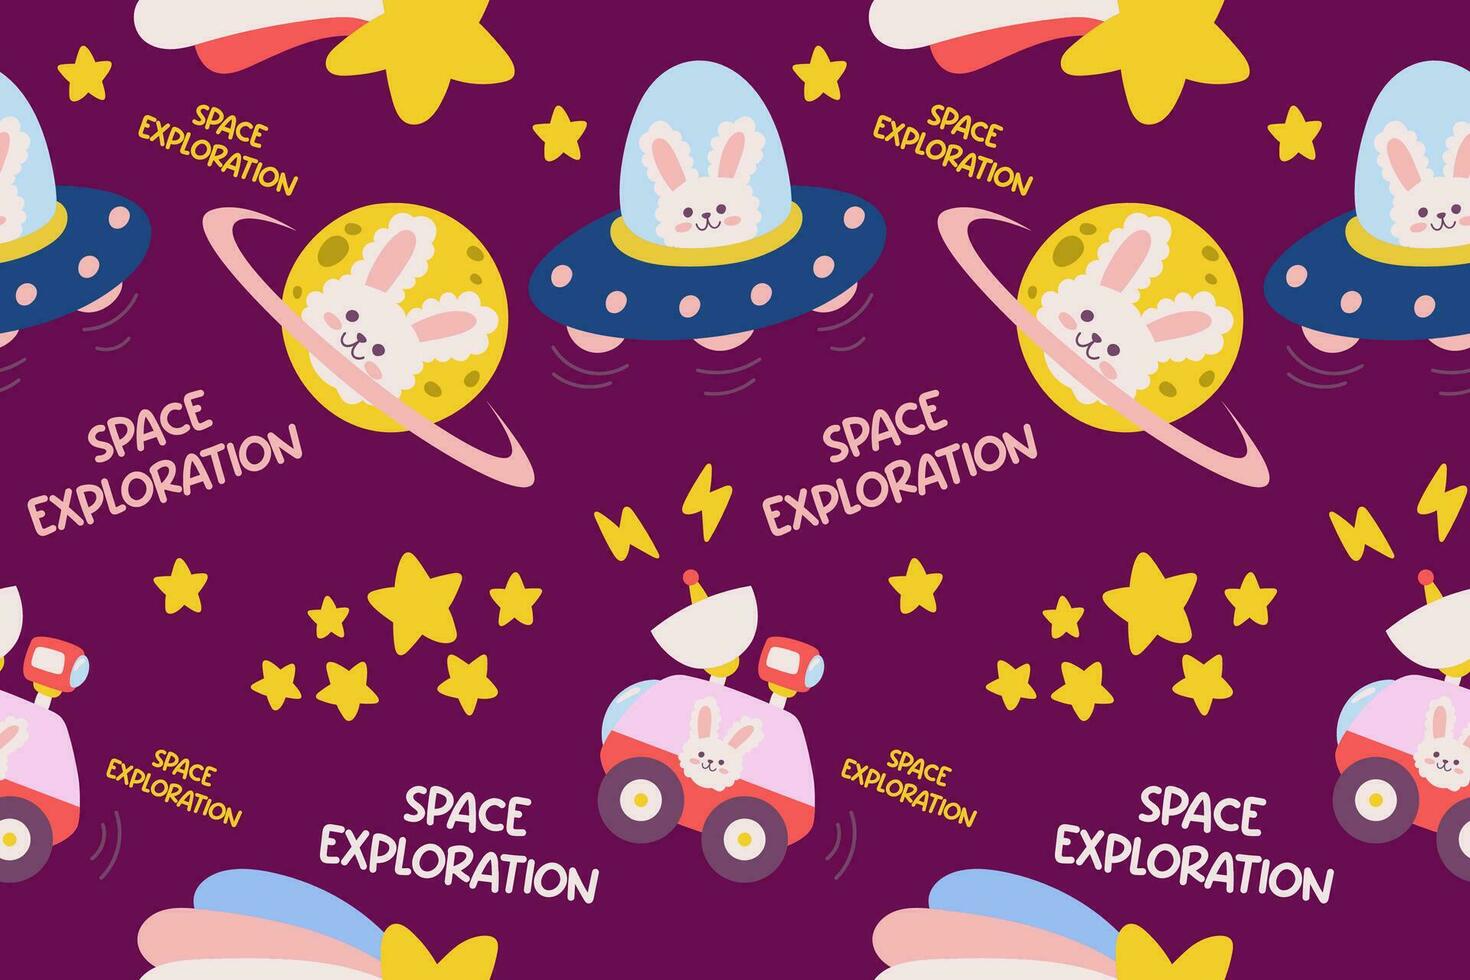 Kawaii Outer Space Seamless Pattern Background. Cute Cosmic Galaxy themed for apparel, textile and wrapping paper vector